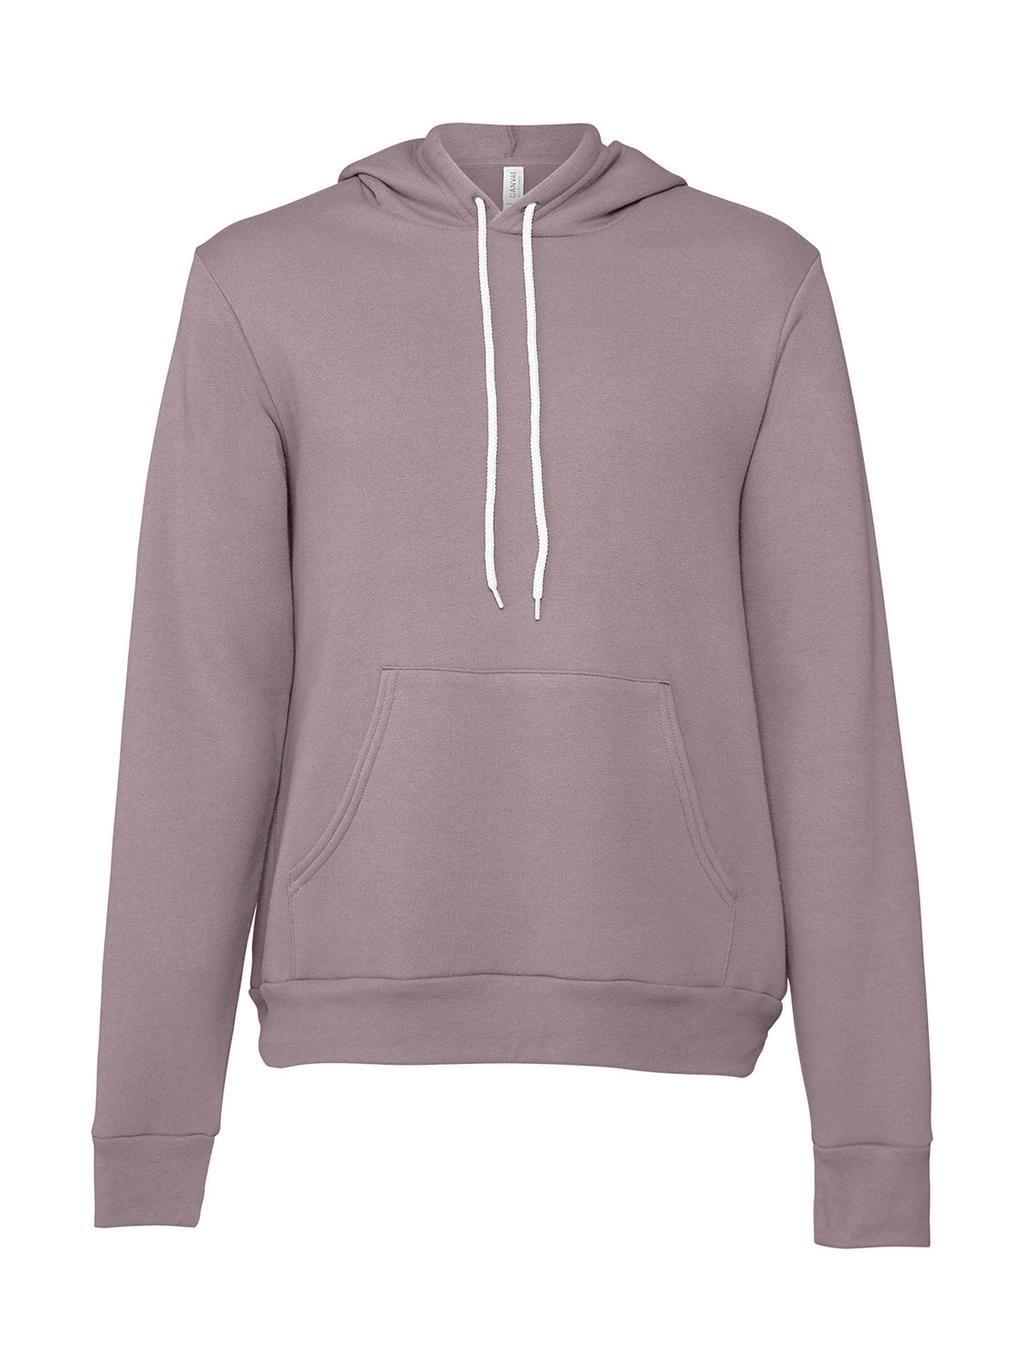  Unisex Poly-Cotton Pullover Hoodie in Farbe Storm